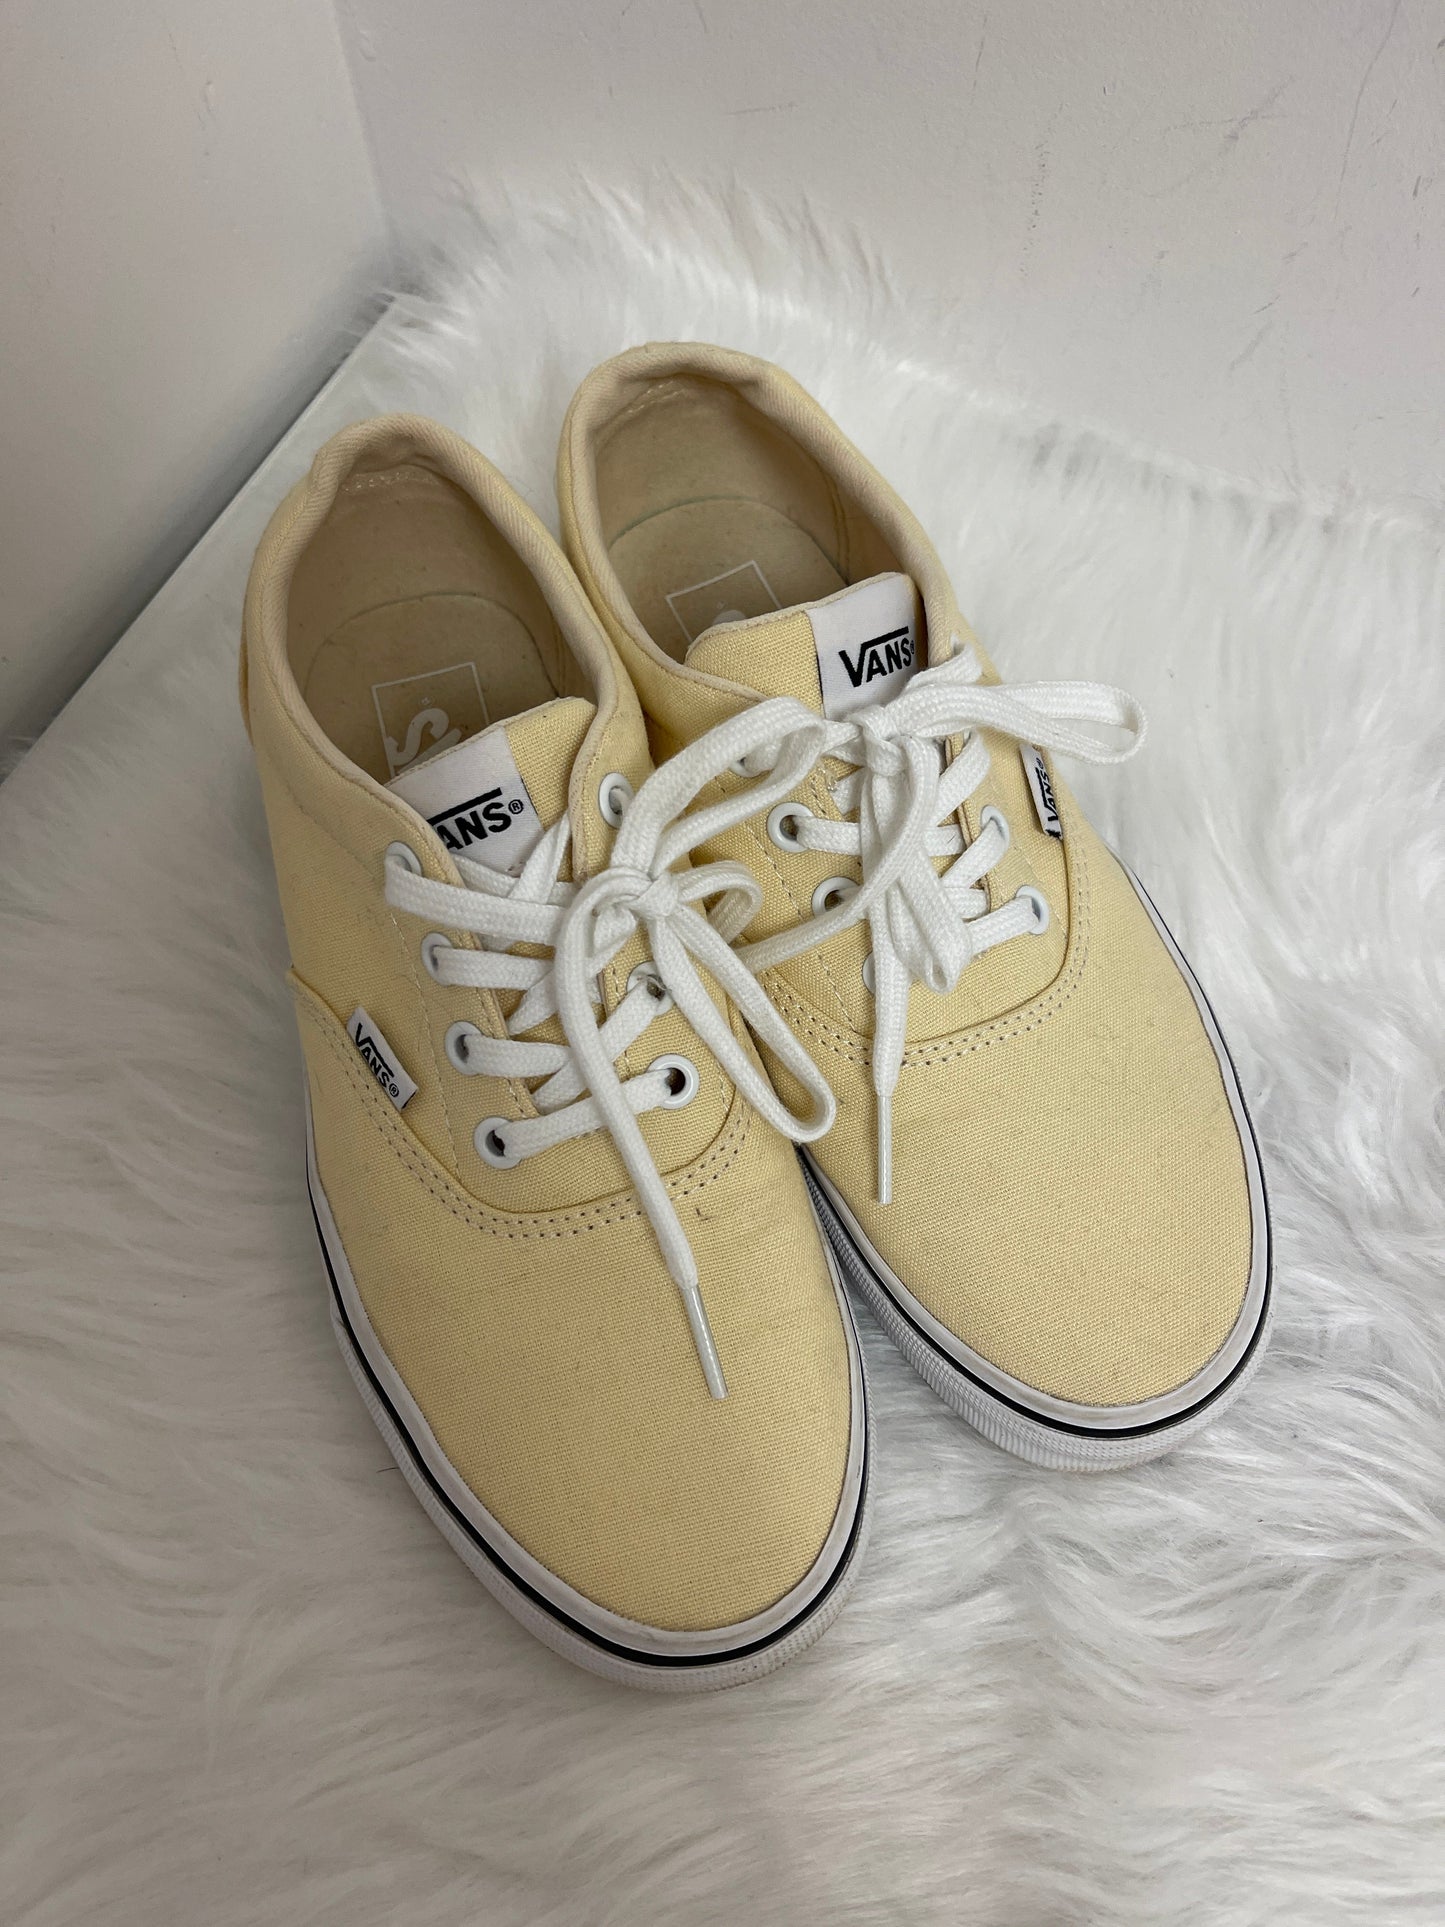 Yellow Shoes Sneakers Vans, Size 6.5